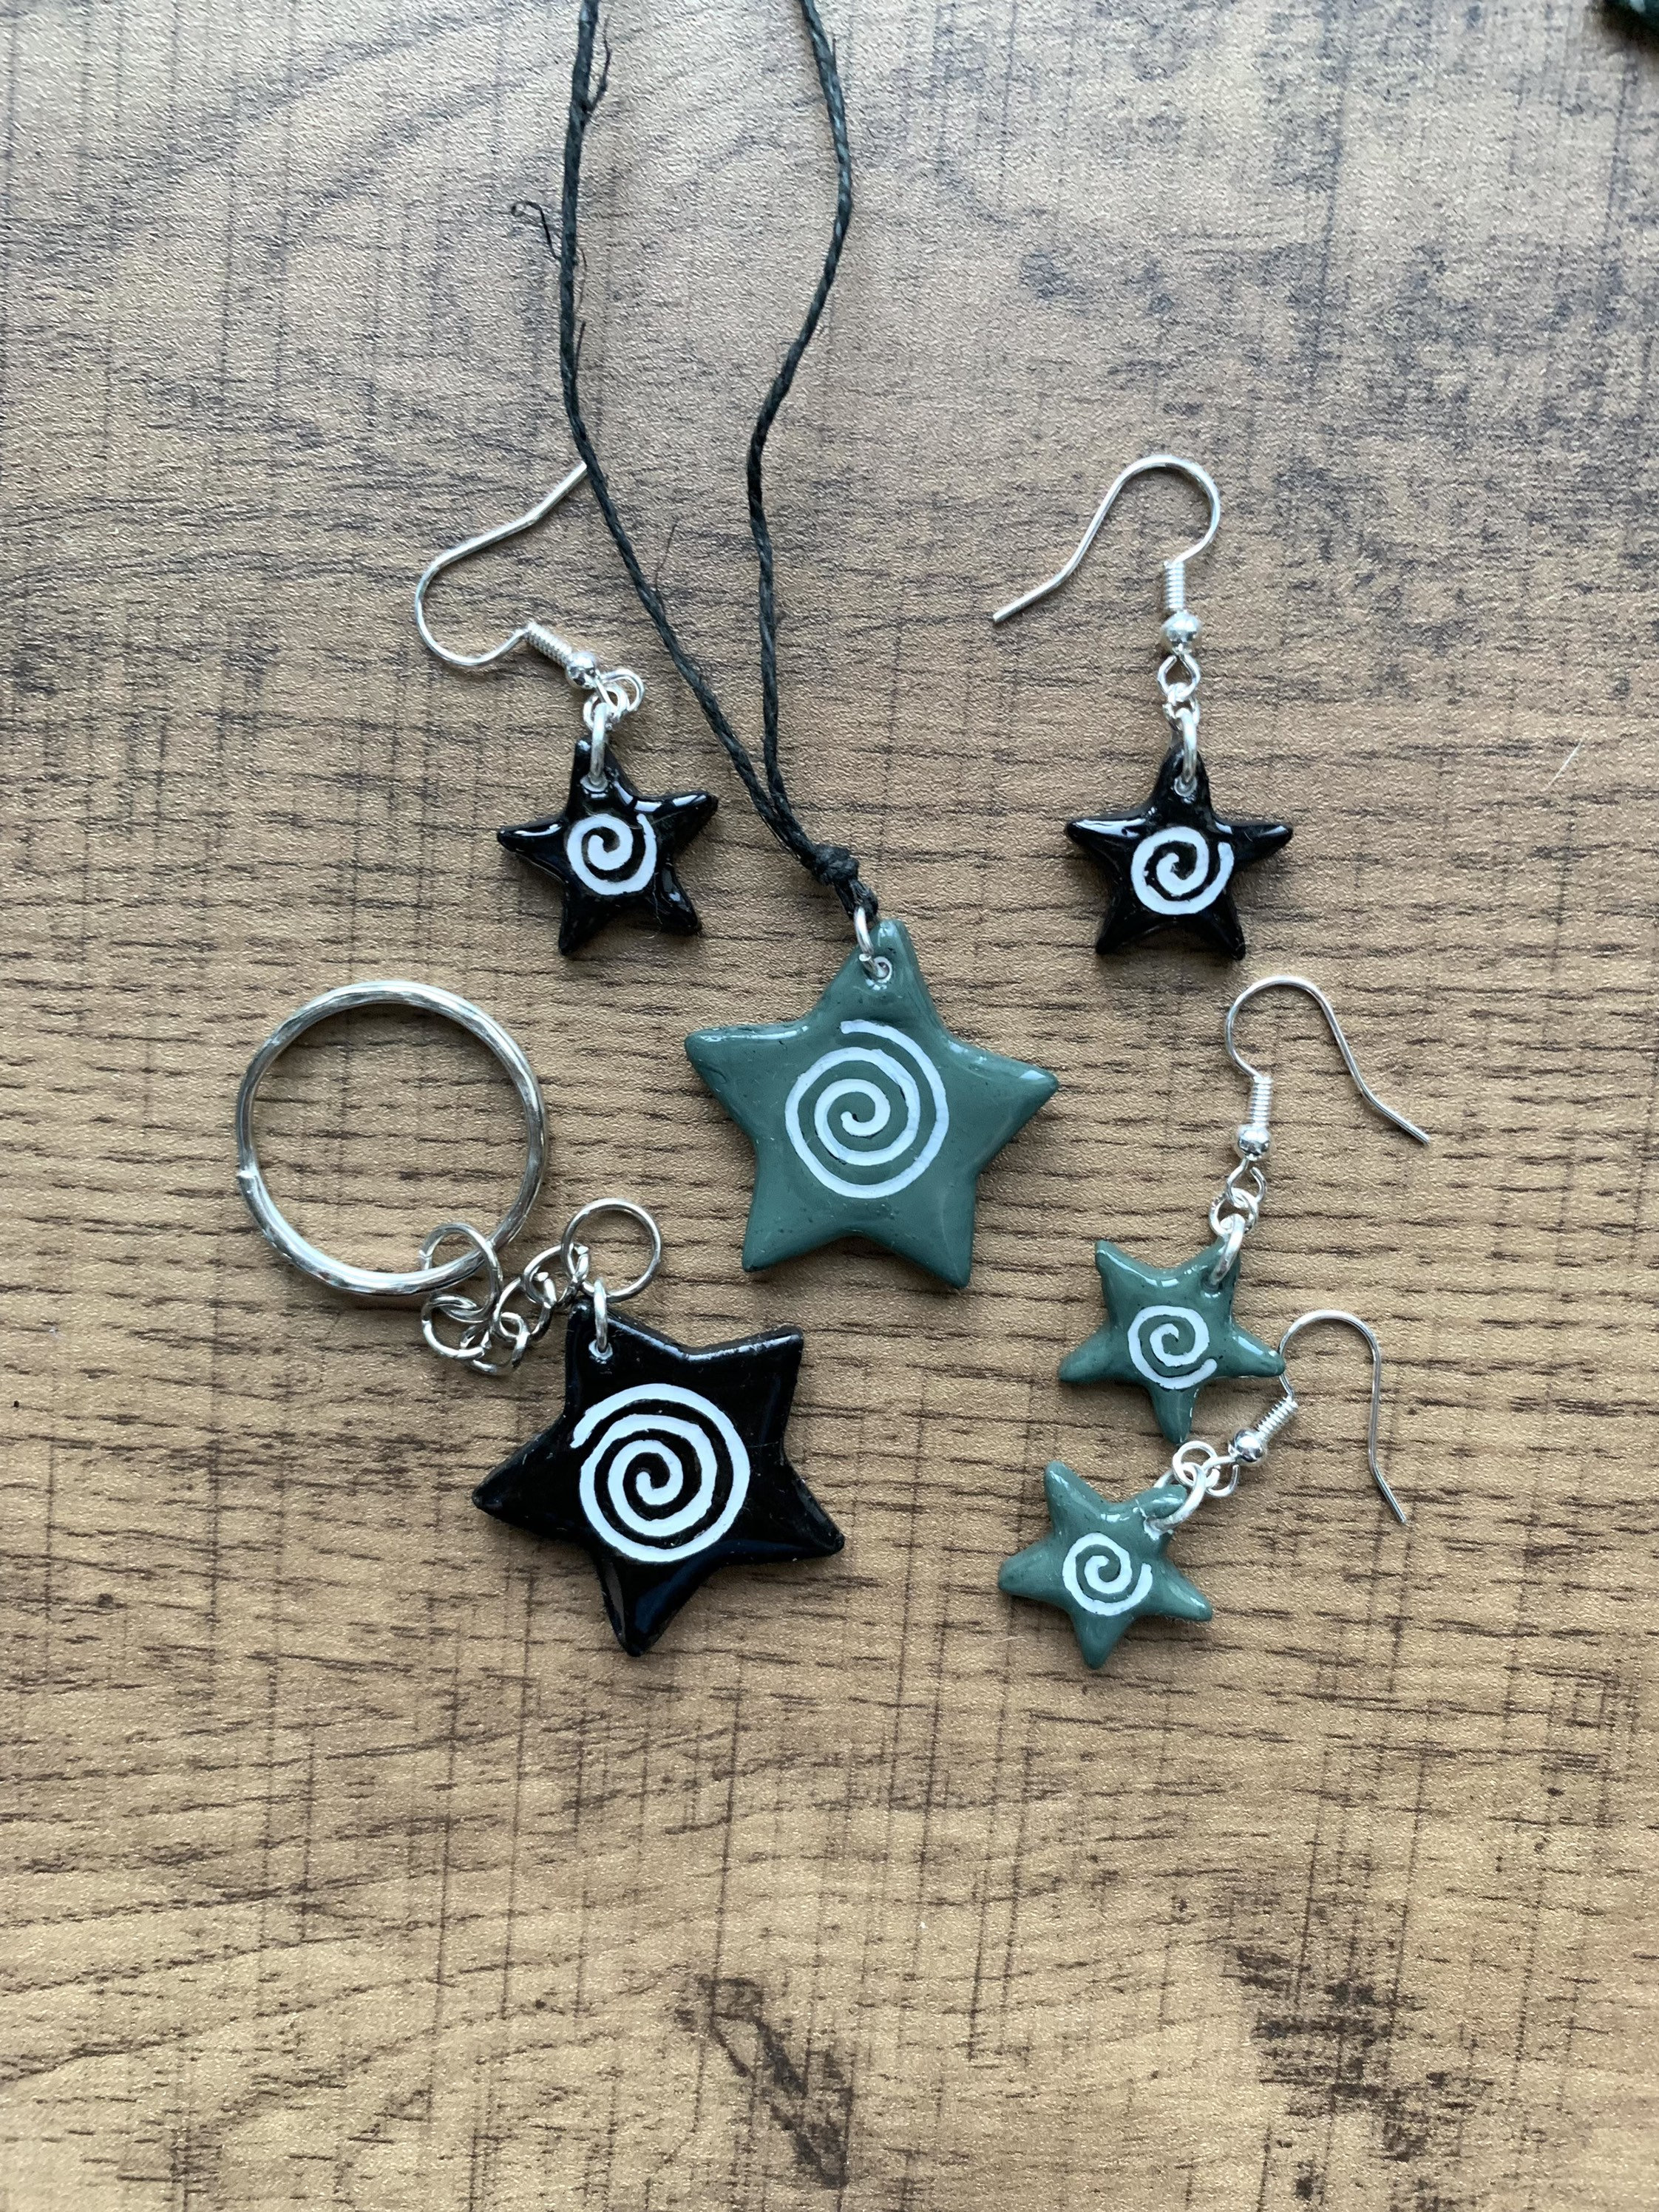 Spiral Star Clay Charm Necklaces, Earrings, Keyrings, Phone Charms and Pin  Badges Grunge Y2k Goblincore Swirl Stars Whimsigoth Pagan 